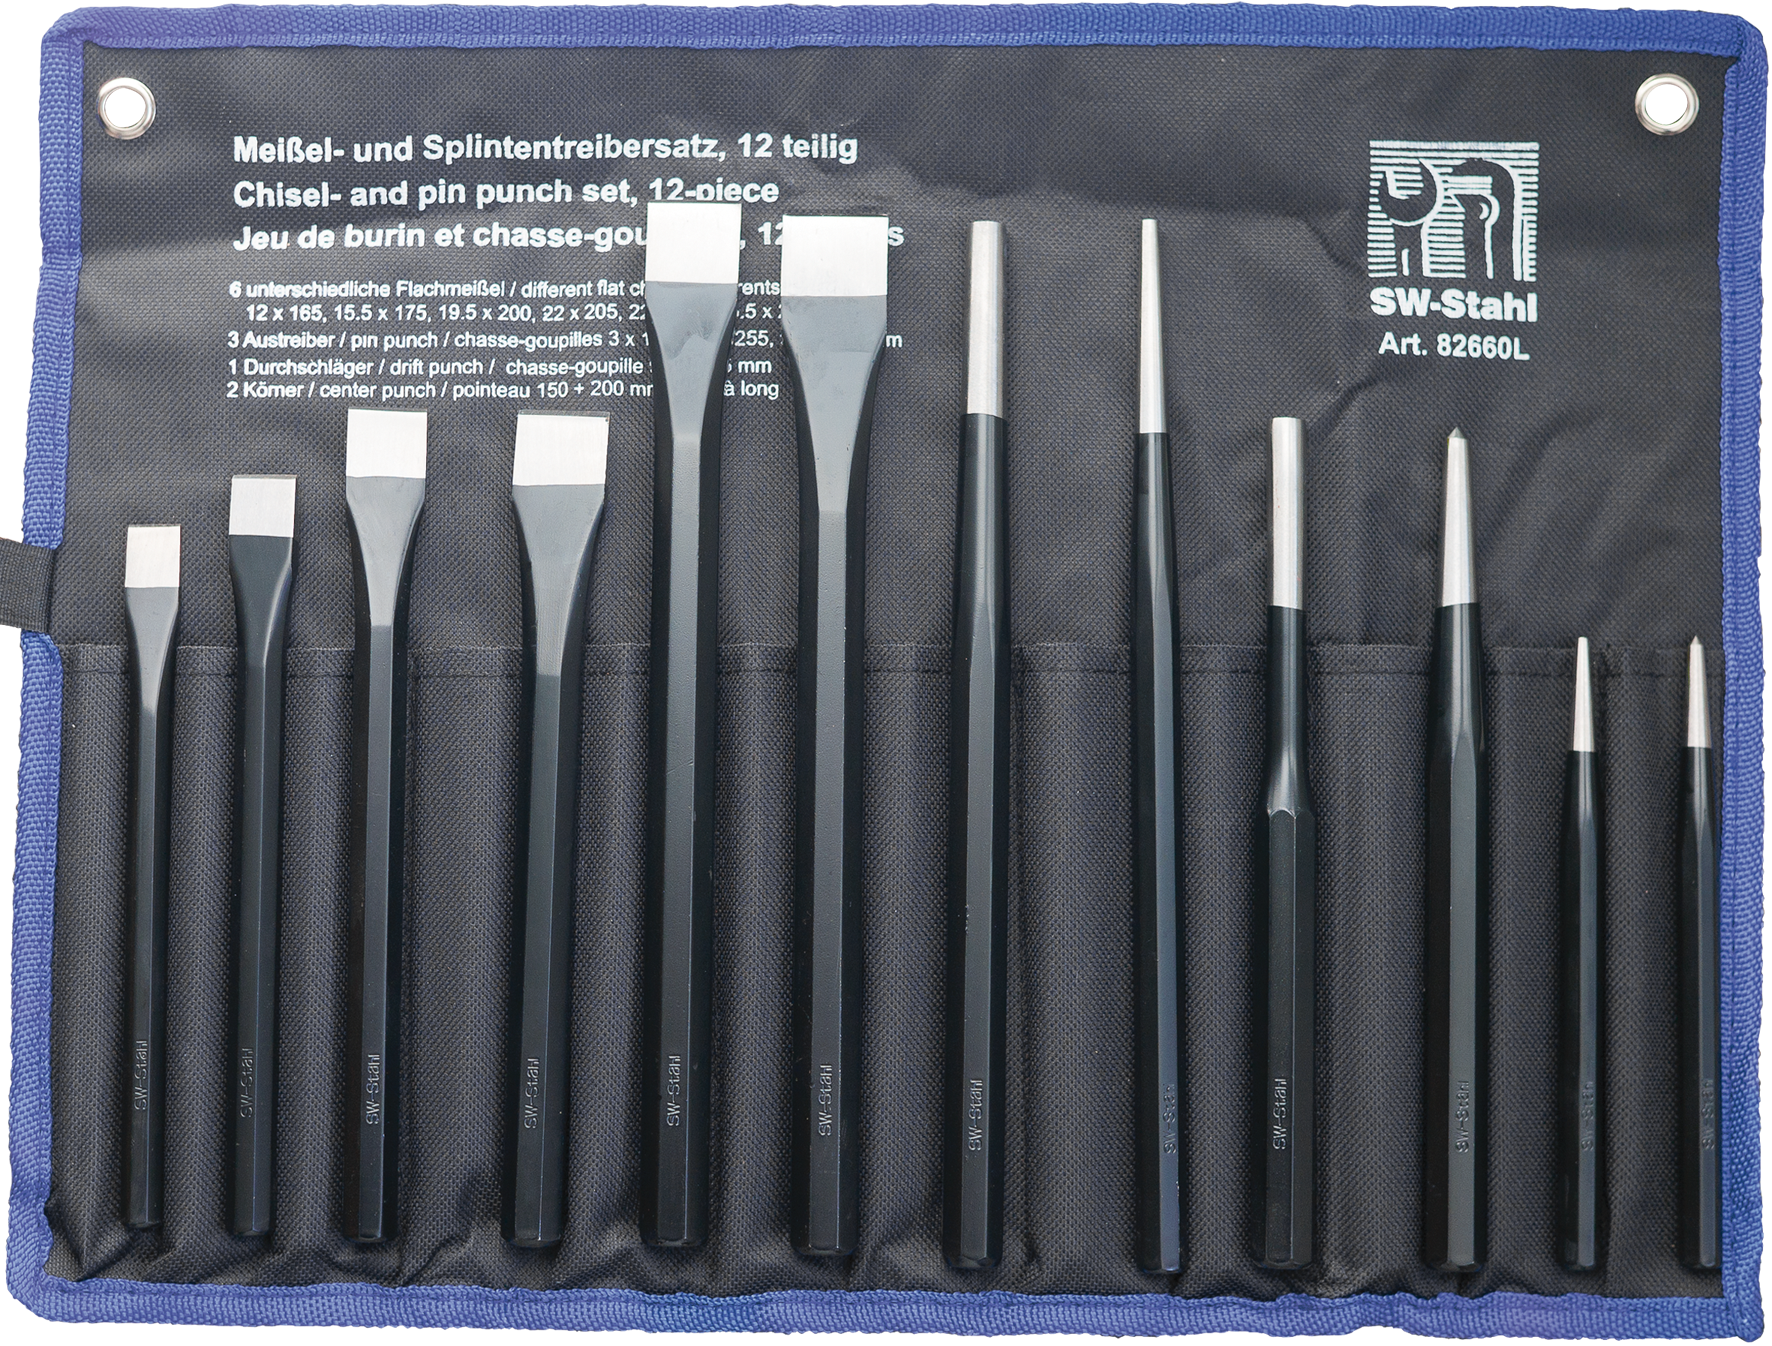 SWSTAHL Chisel- and pin punch set 82660L